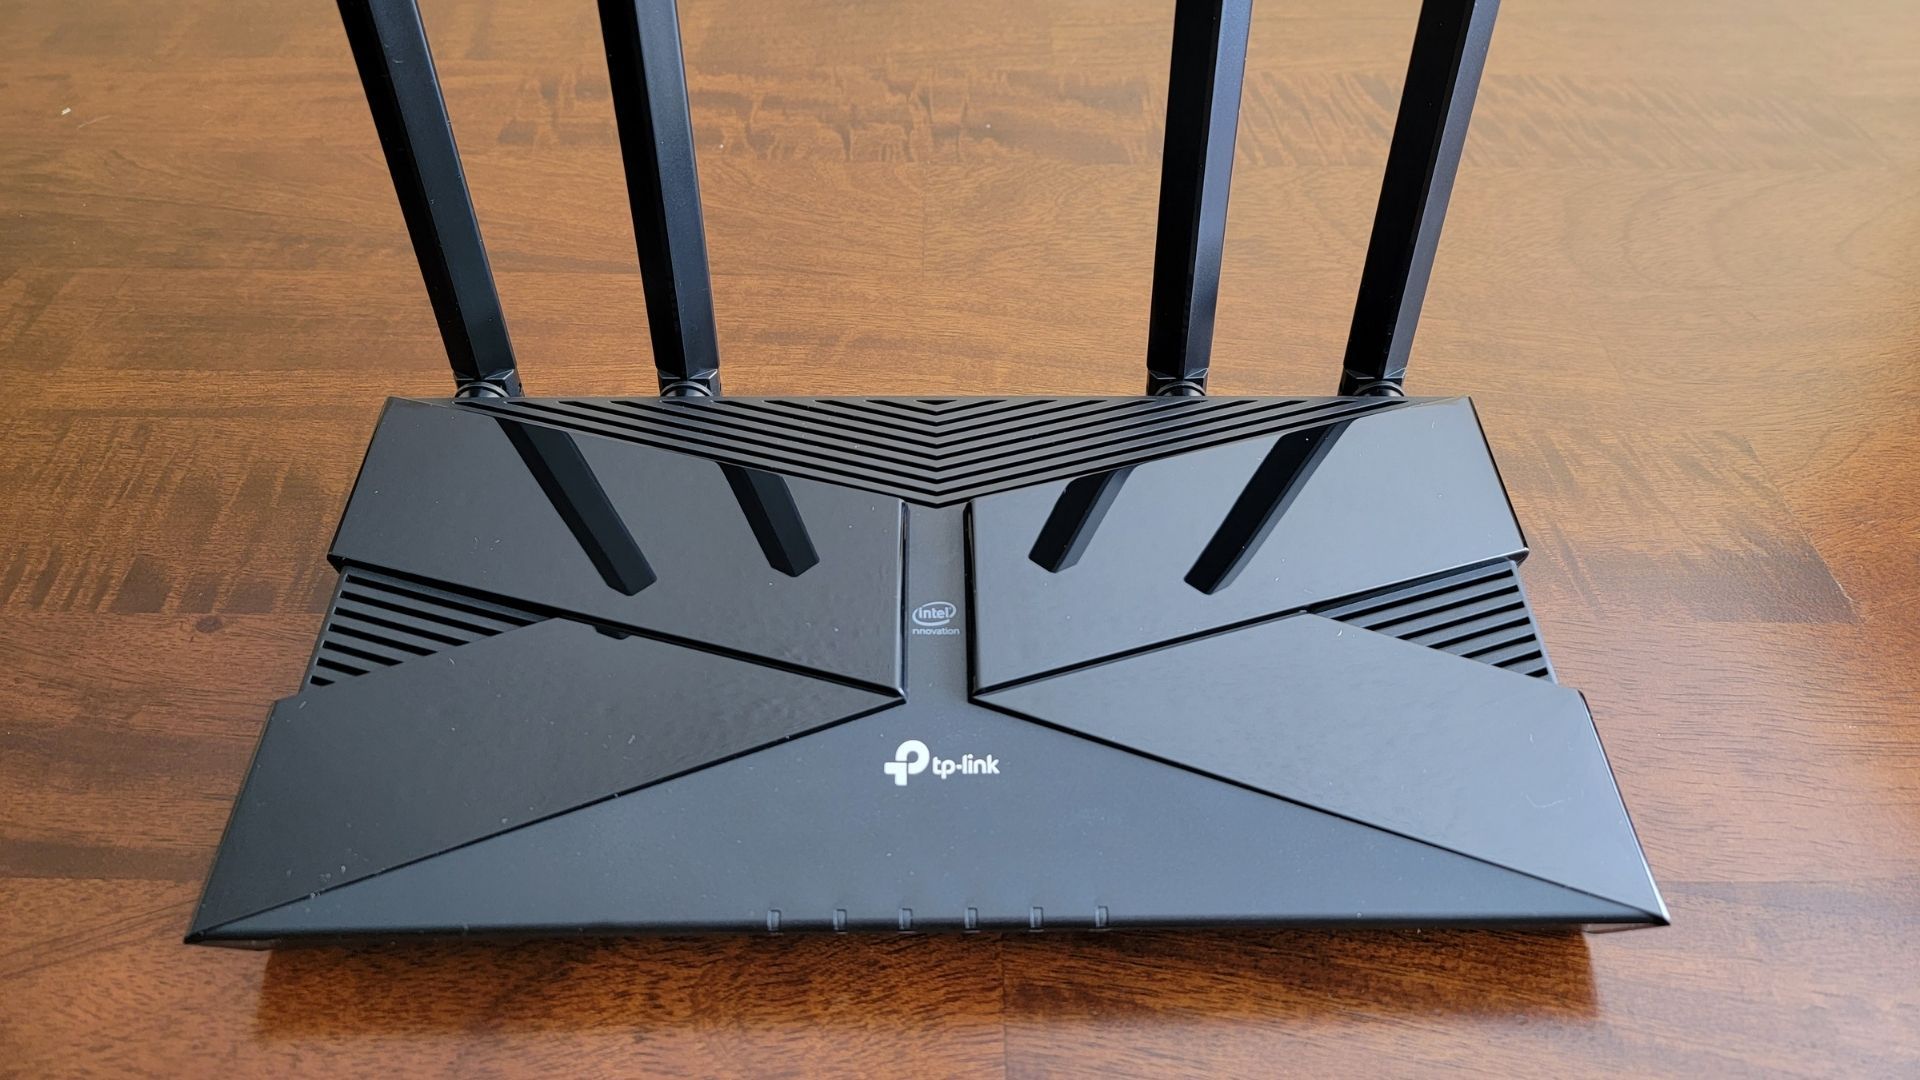 An overhead shot of the tp-link archer ax50 router by itself on a wooden table (1)